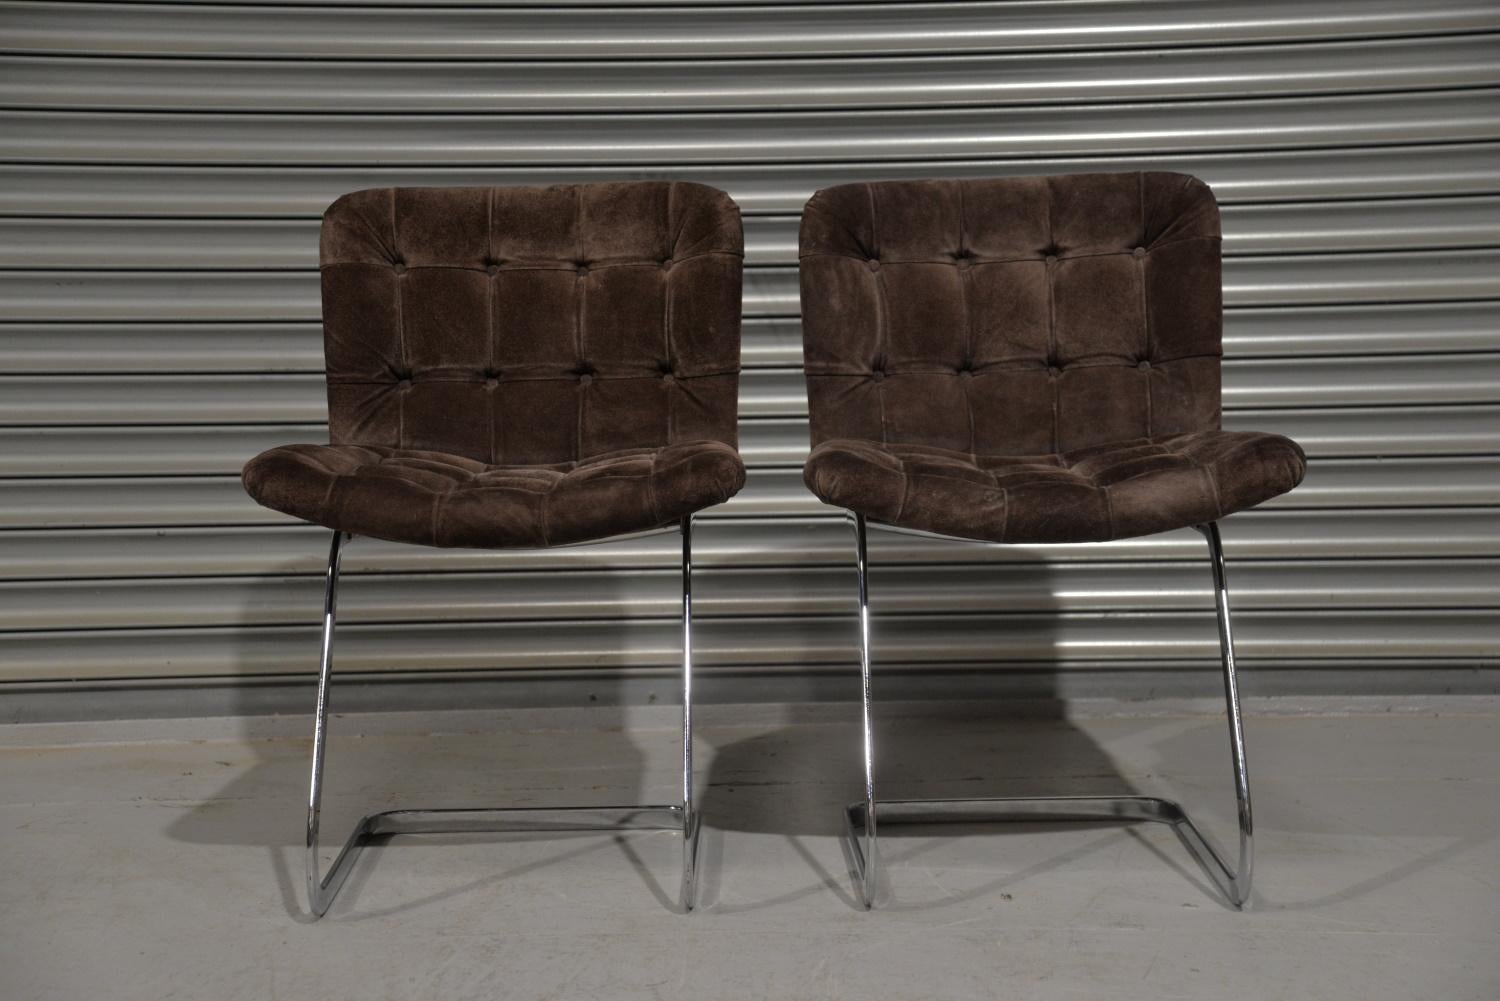 We are delighted to bring to you this set of two RH-304 chairs designed by Robert Haussmann and manufactured in Switzerland by de Sede during the 1960s. The set is upholstered in brown leather with a velvet texture and buttons. The frames are made